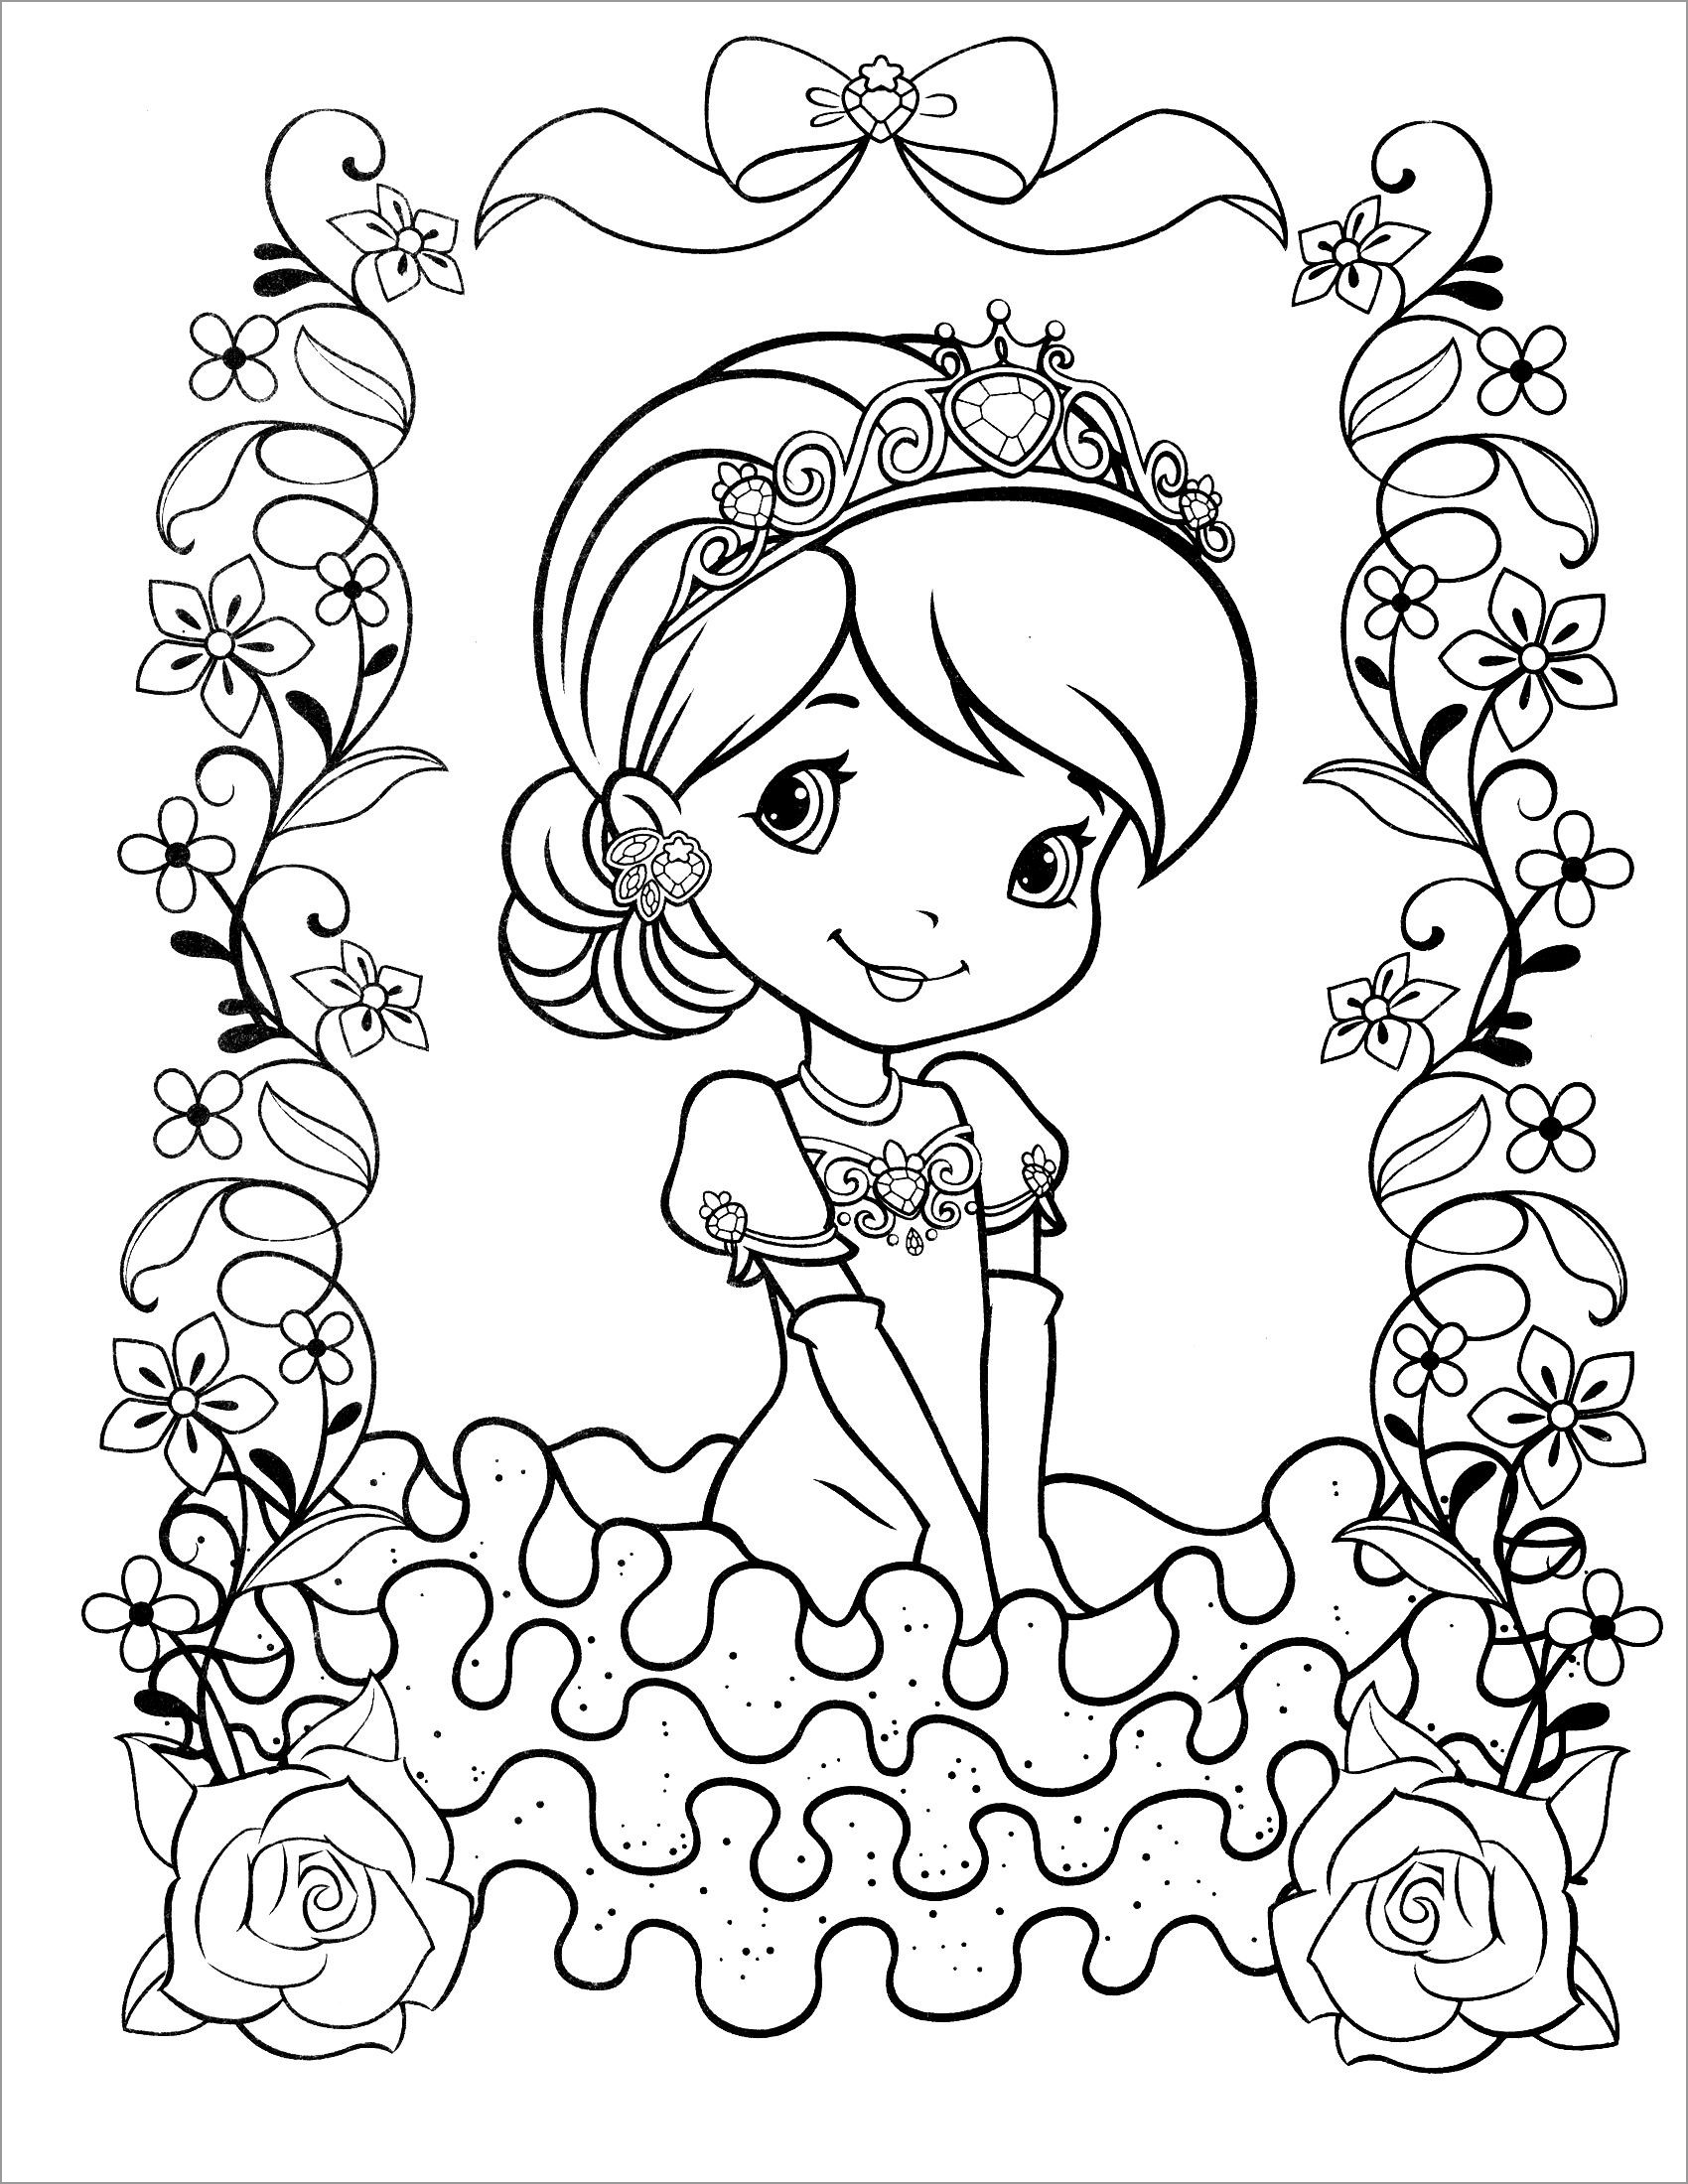 Strawberry Shortcake Coloring Pages Printable   ColoringBay